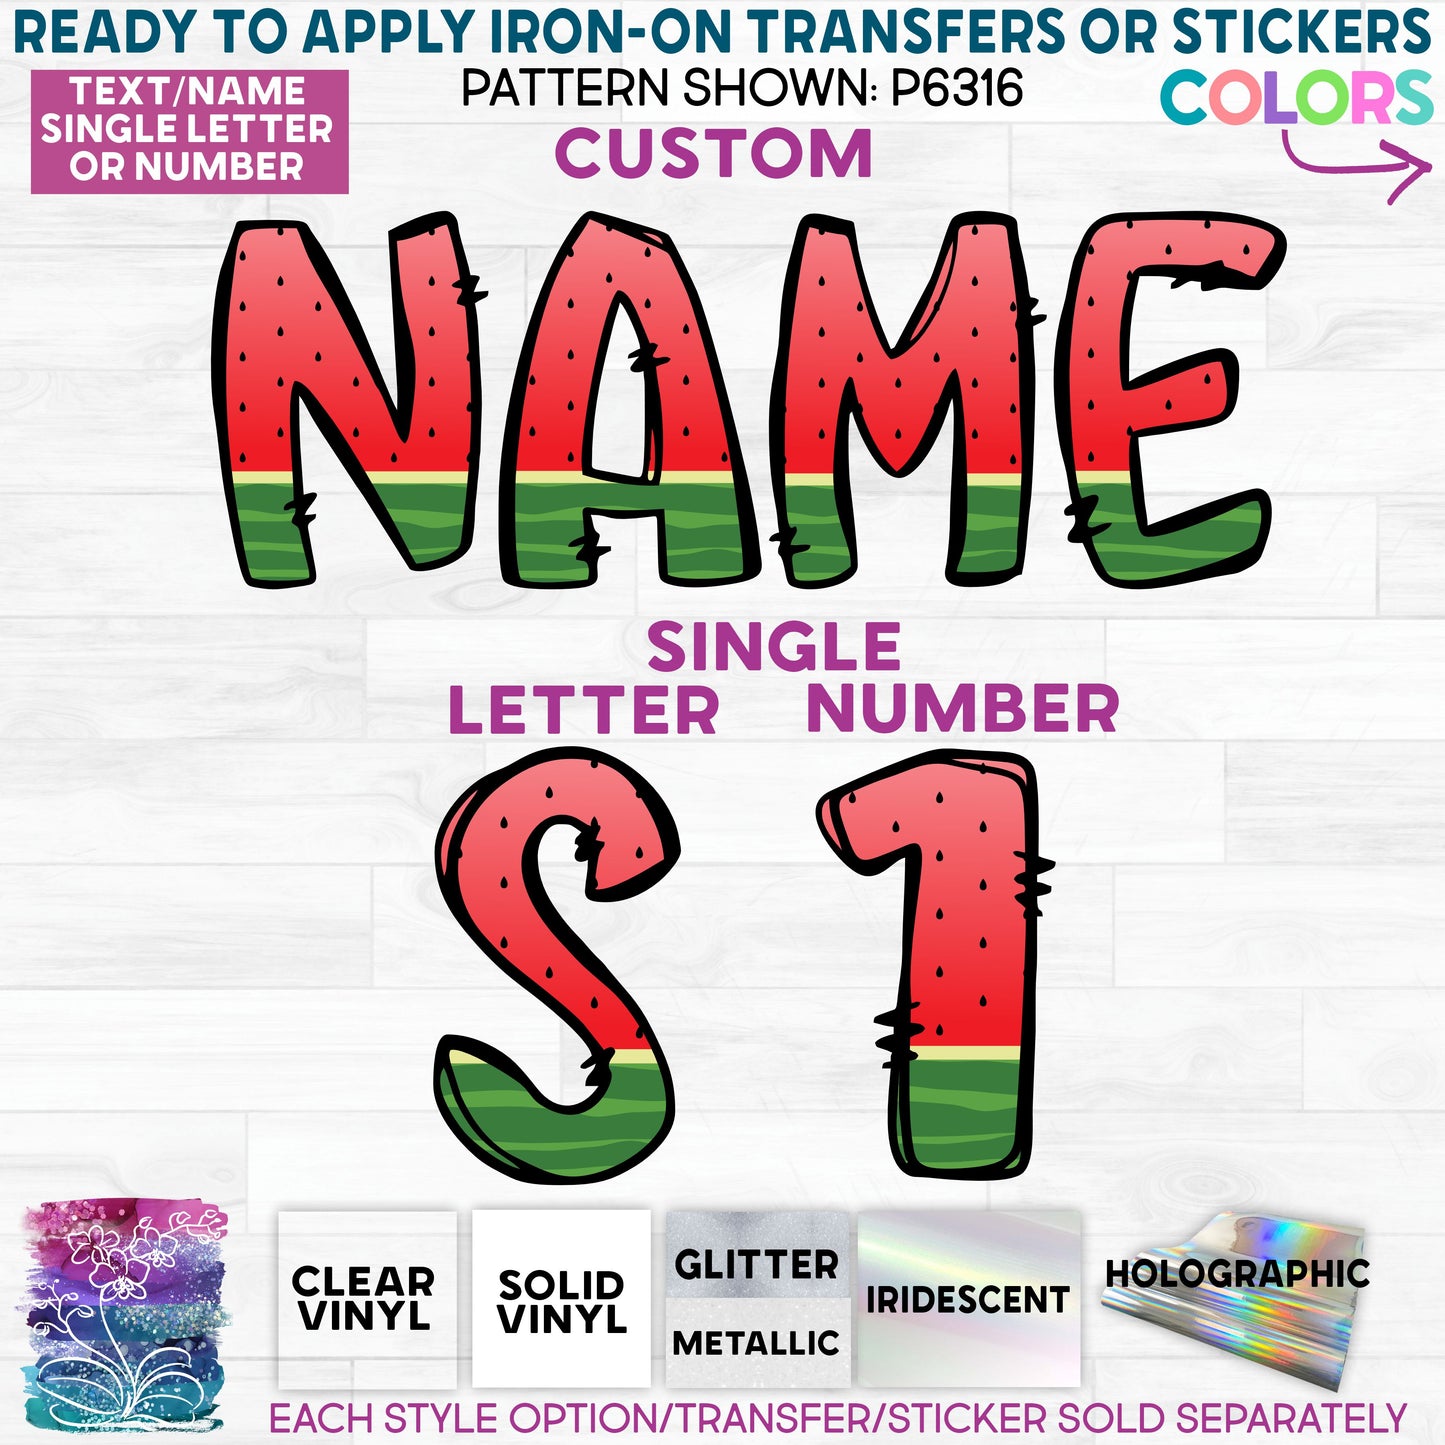 (s367-P6316) Red Watermelon Letters Numbers Custom Name Text Glitter or Vinyl Iron-On Transfer or Sticker